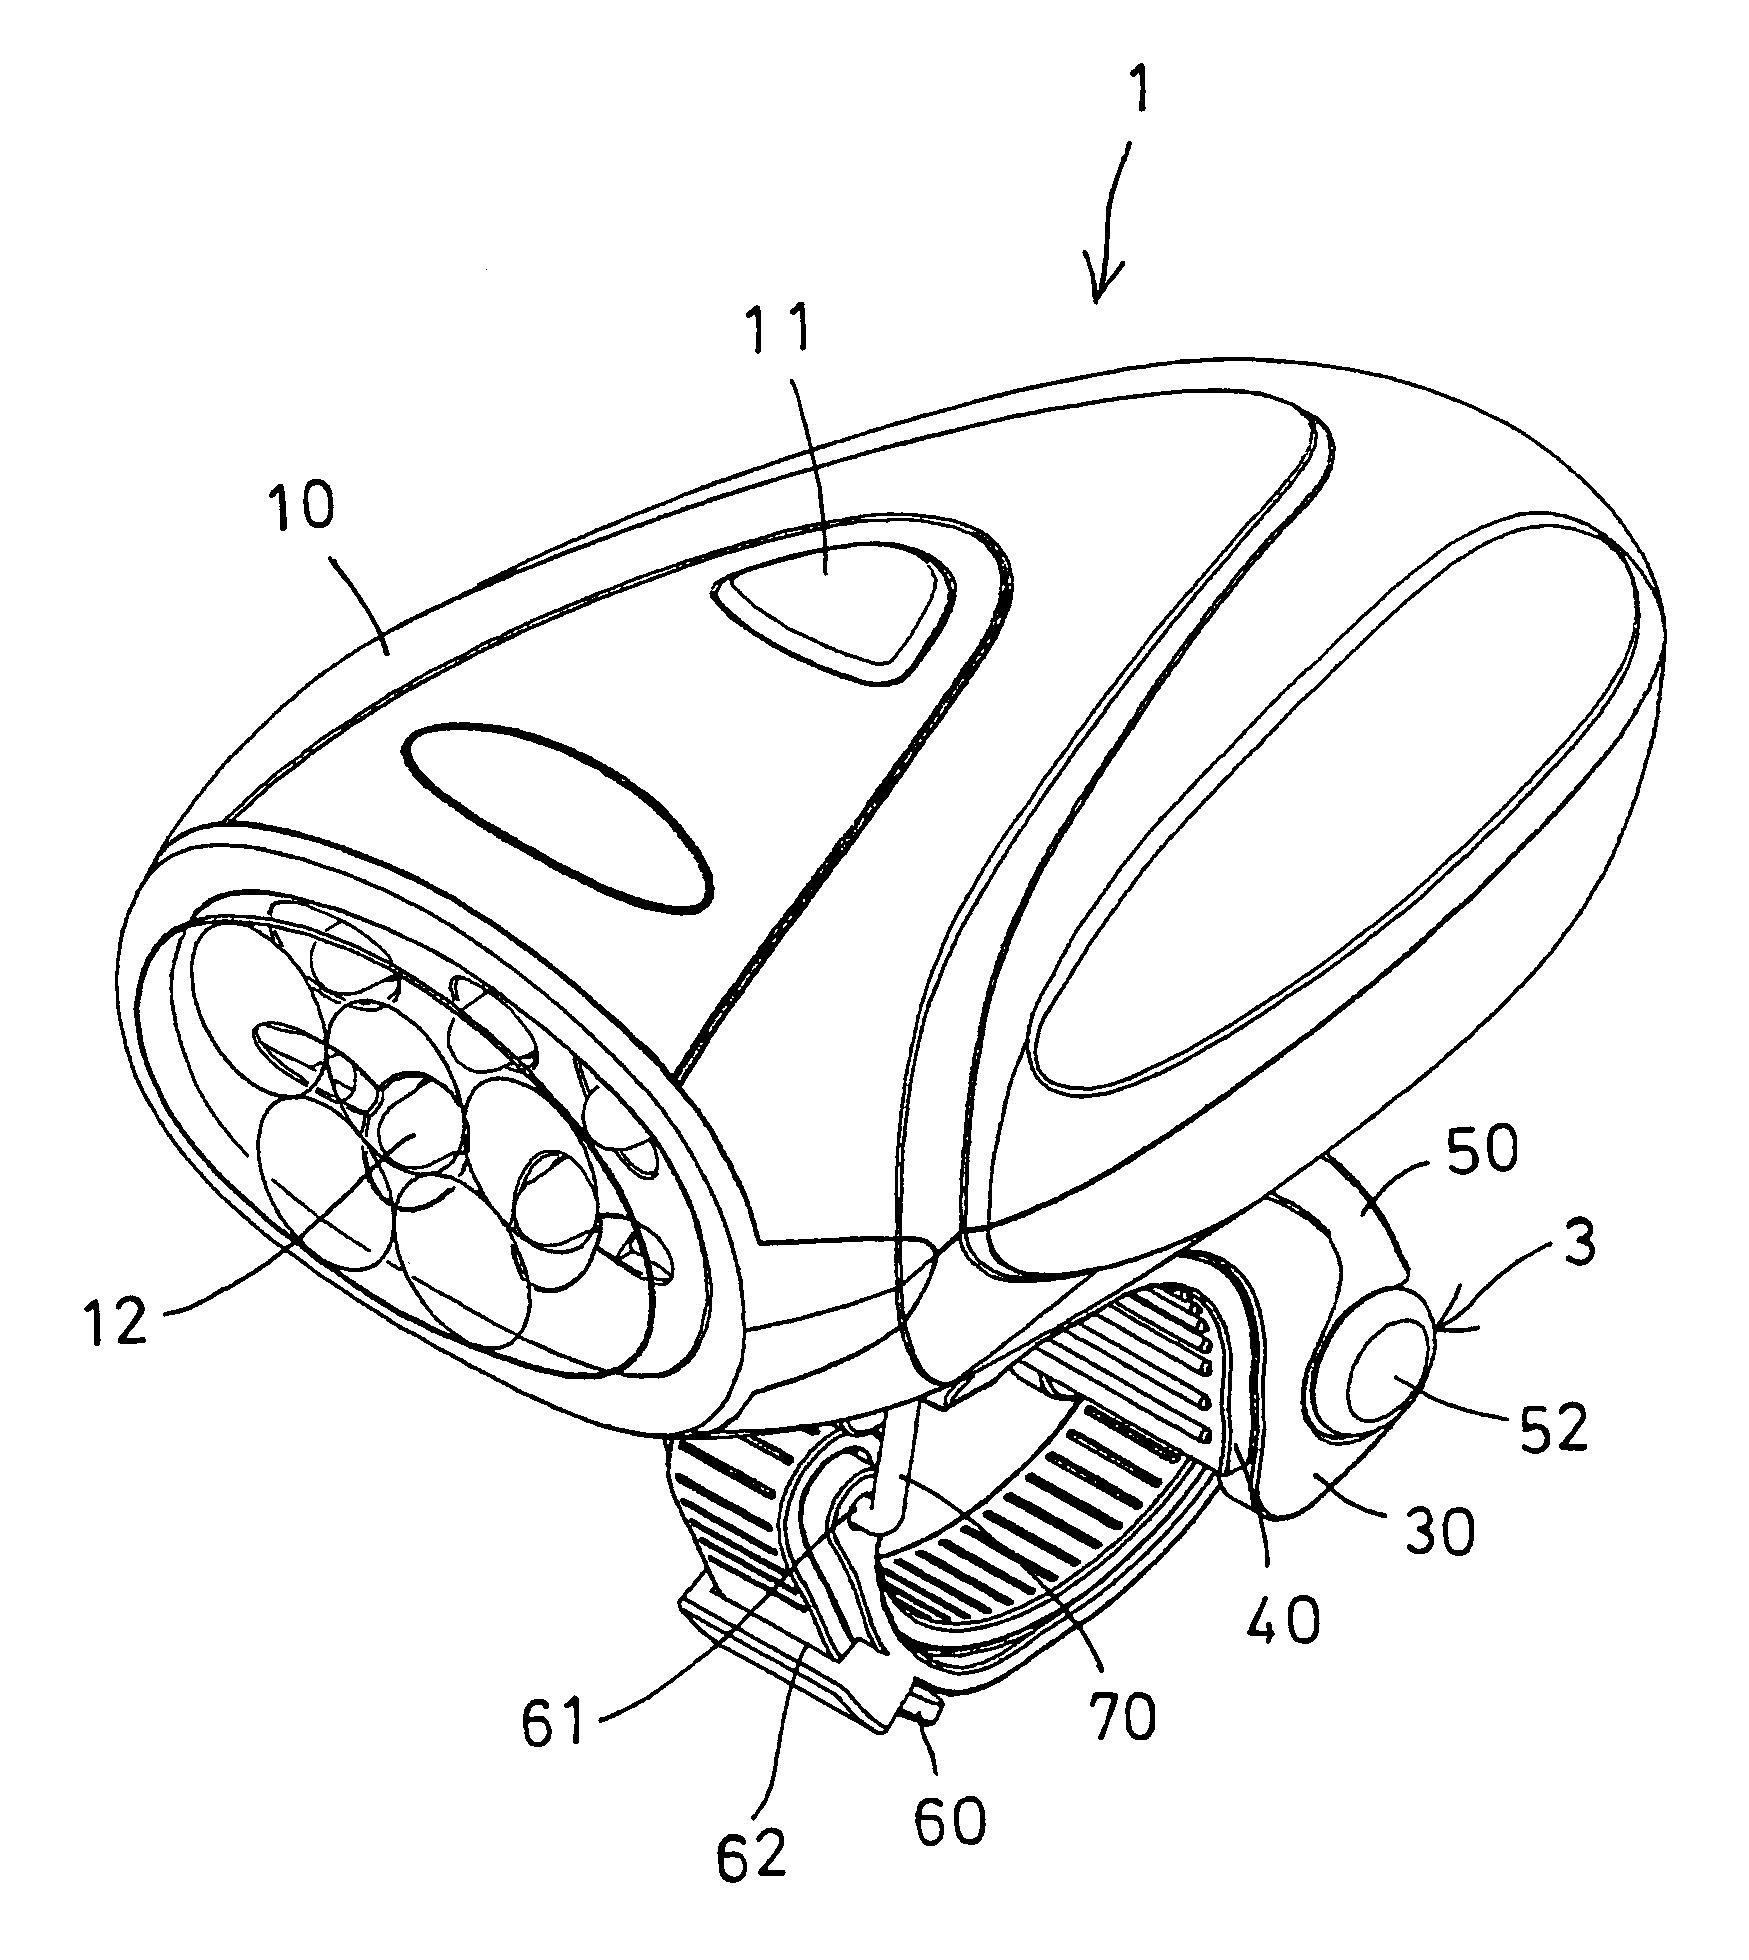 Light device for attaching to objects